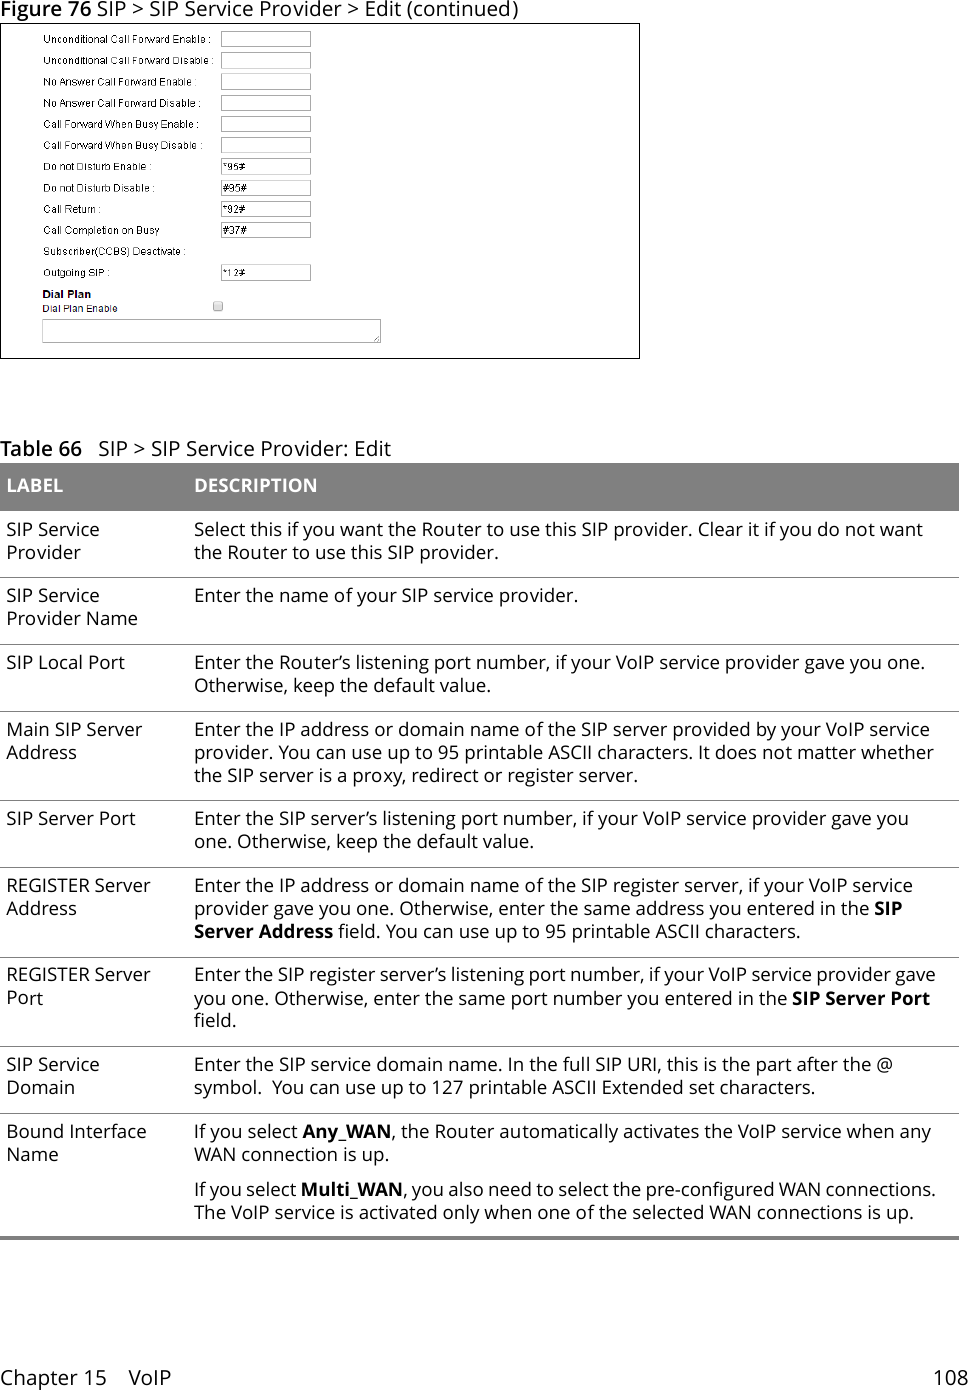 Chapter 15    VoIP 108Figure 76 SIP &gt; SIP Service Provider &gt; Edit (continued)Table 66   SIP &gt; SIP Service Provider: Edit LABEL DESCRIPTIONSIP Service ProviderSelect this if you want the Router to use this SIP provider. Clear it if you do not want the Router to use this SIP provider.SIP Service Provider NameEnter the name of your SIP service provider. SIP Local Port Enter the Router’s listening port number, if your VoIP service provider gave you one. Otherwise, keep the default value.Main SIP Server AddressEnter the IP address or domain name of the SIP server provided by your VoIP service provider. You can use up to 95 printable ASCII characters. It does not matter whether the SIP server is a proxy, redirect or register server.SIP Server Port Enter the SIP server’s listening port number, if your VoIP service provider gave you one. Otherwise, keep the default value.REGISTER Server AddressEnter the IP address or domain name of the SIP register server, if your VoIP service provider gave you one. Otherwise, enter the same address you entered in the SIP Server Address field. You can use up to 95 printable ASCII characters.REGISTER Server PortEnter the SIP register server’s listening port number, if your VoIP service provider gave you one. Otherwise, enter the same port number you entered in the SIP Server Port field.SIP Service DomainEnter the SIP service domain name. In the full SIP URI, this is the part after the @ symbol.  You can use up to 127 printable ASCII Extended set characters.Bound Interface NameIf you select Any_WAN, the Router automatically activates the VoIP service when any WAN connection is up.If you select Multi_WAN, you also need to select the pre-configured WAN connections. The VoIP service is activated only when one of the selected WAN connections is up.